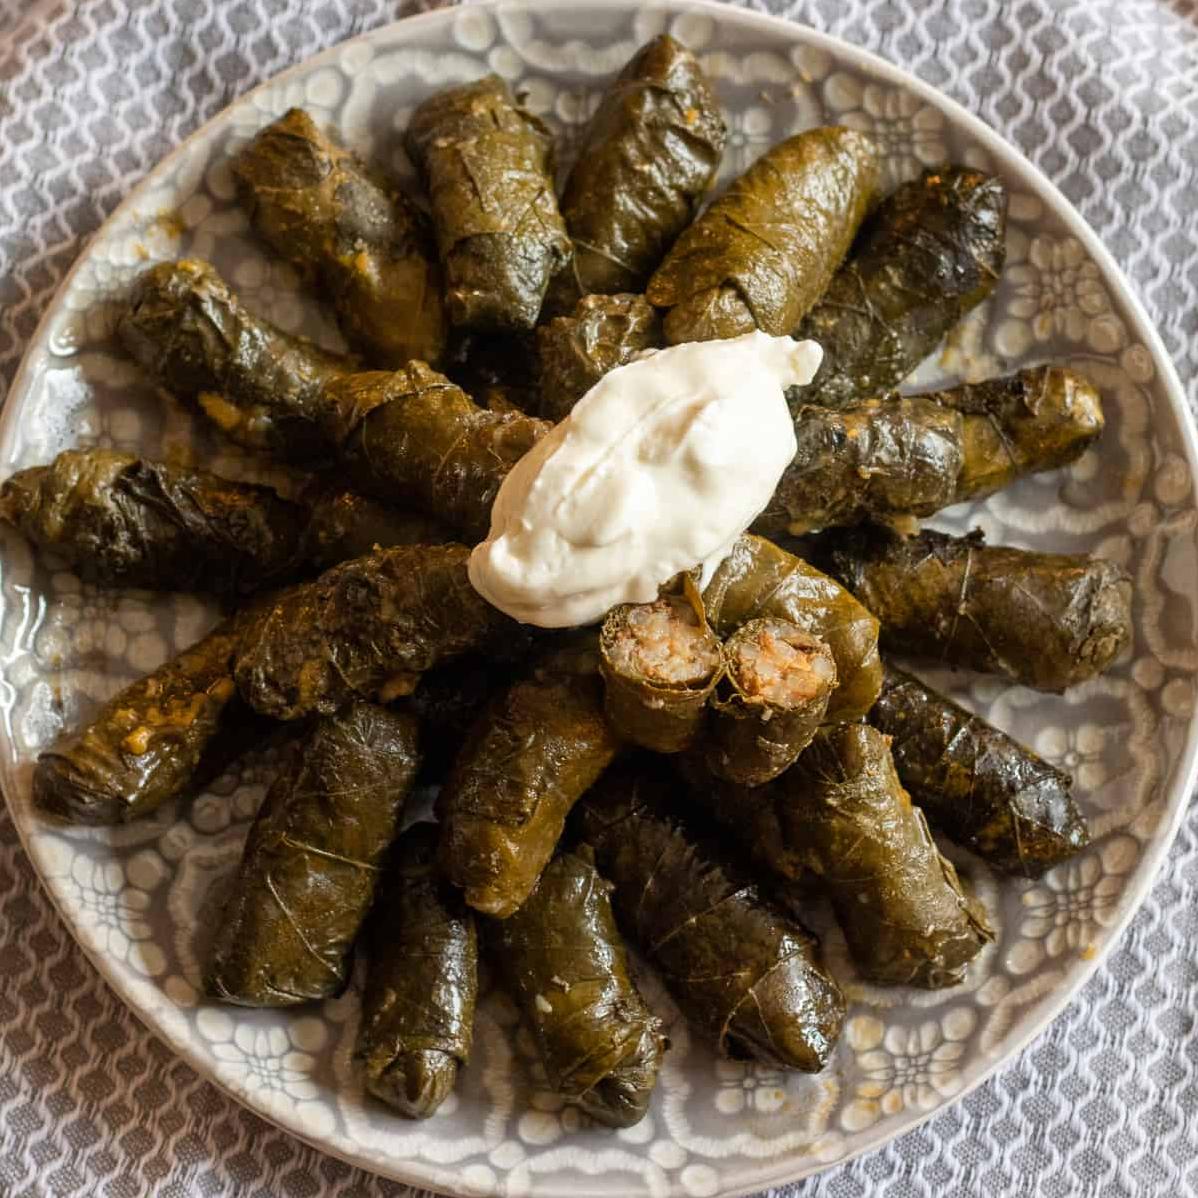  These dolmas will take you on a culinary journey to the Middle East.